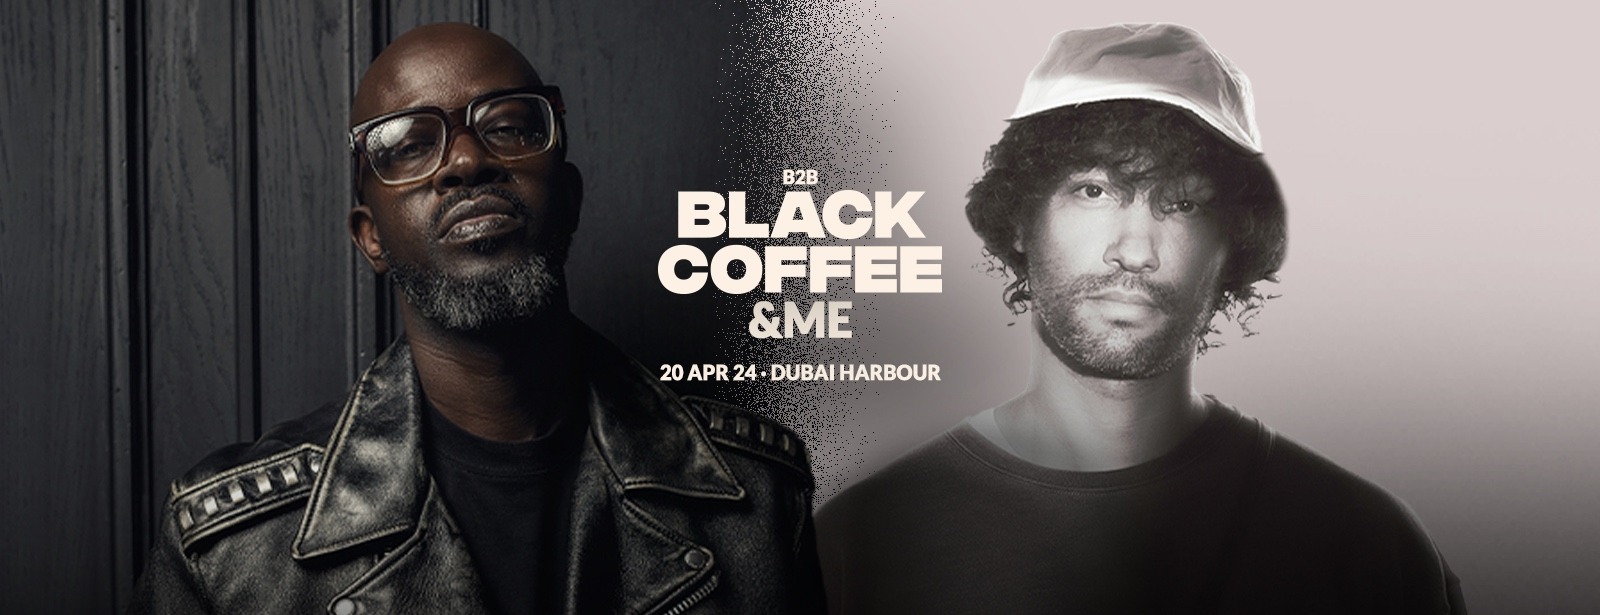 White Festival Presents Black Coffee and &ME in Dubai - Coming Soon in UAE